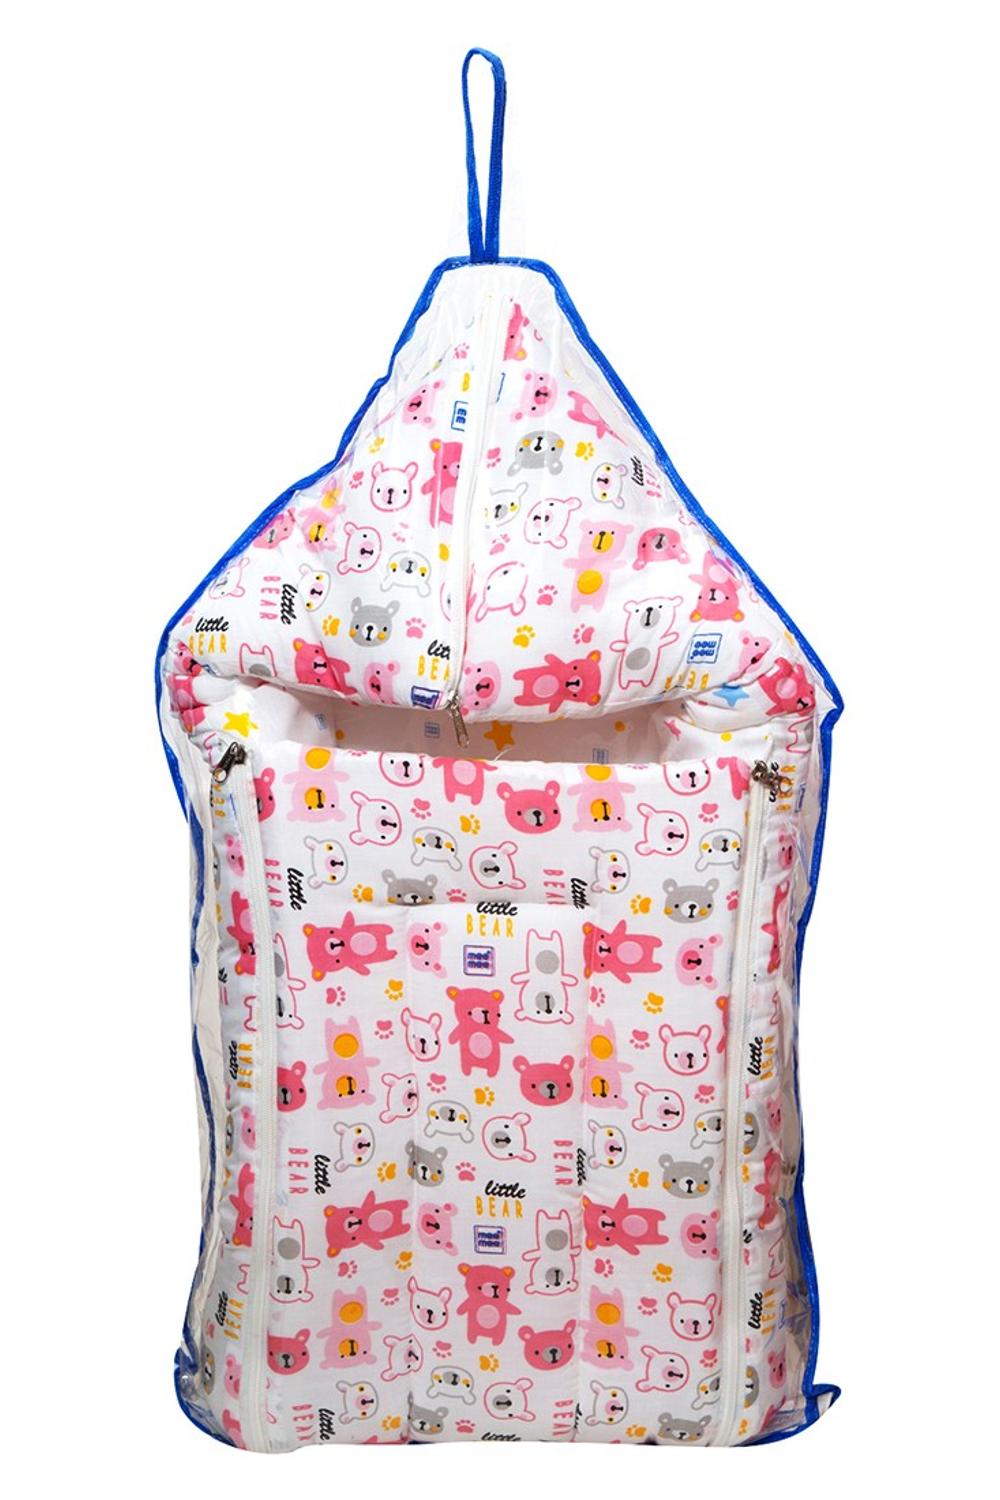 Mee Mee 3 in 1 Baby Carry Nest with Sleeping Bag and Mattress for Babies (Pink Teddy Print)